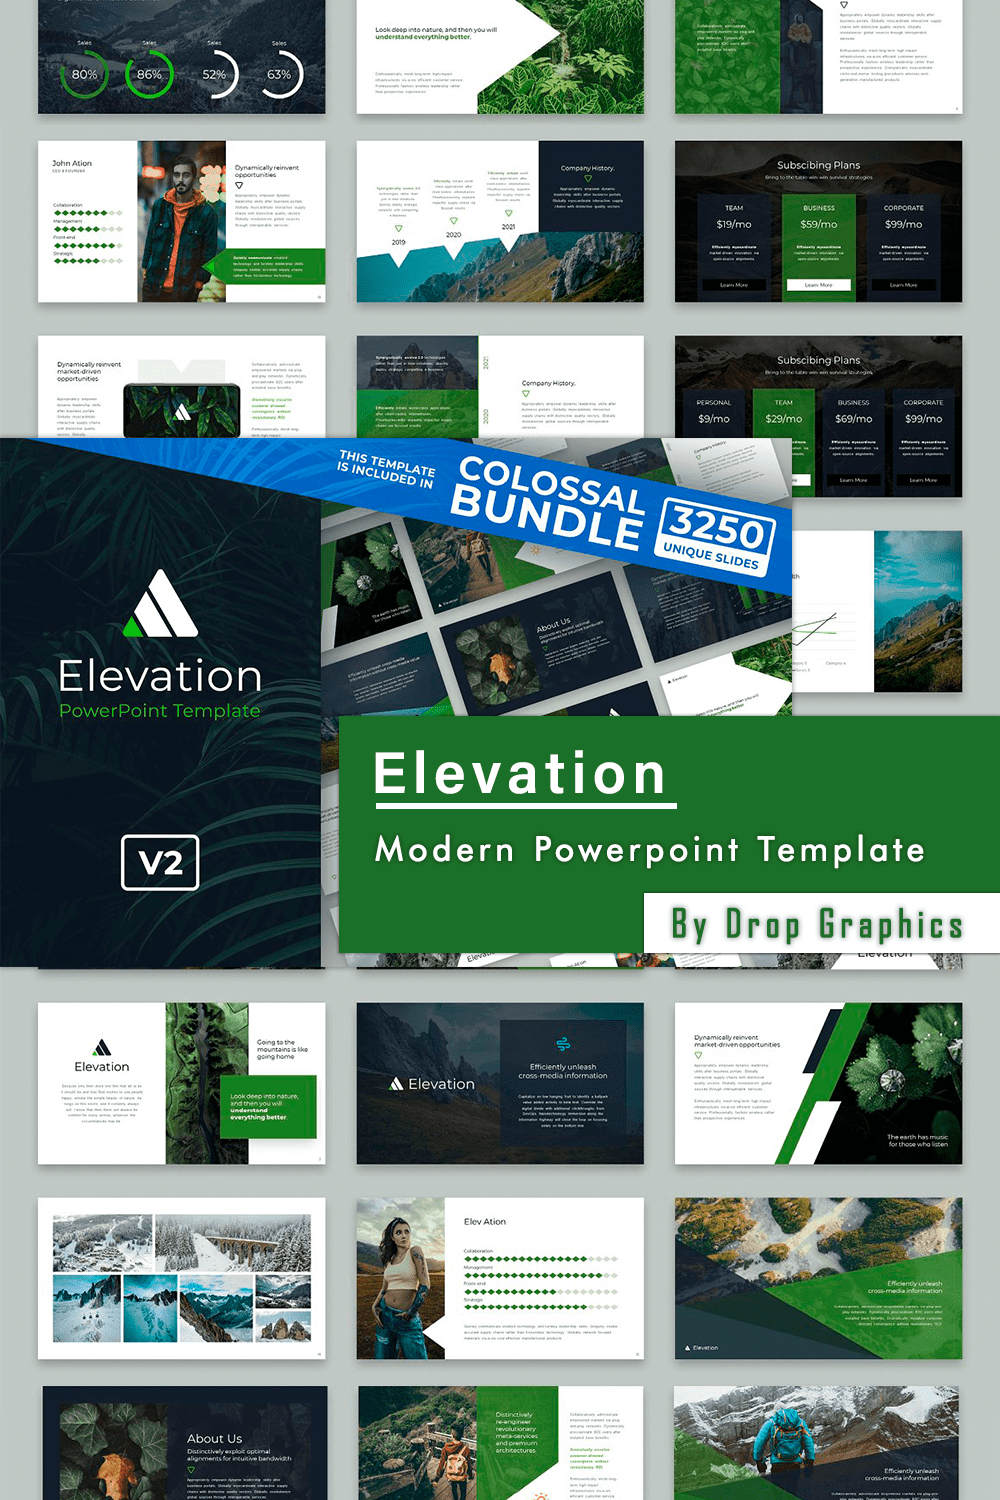 Elevation Modern Powerpoint Template - preview of Pinterest image.